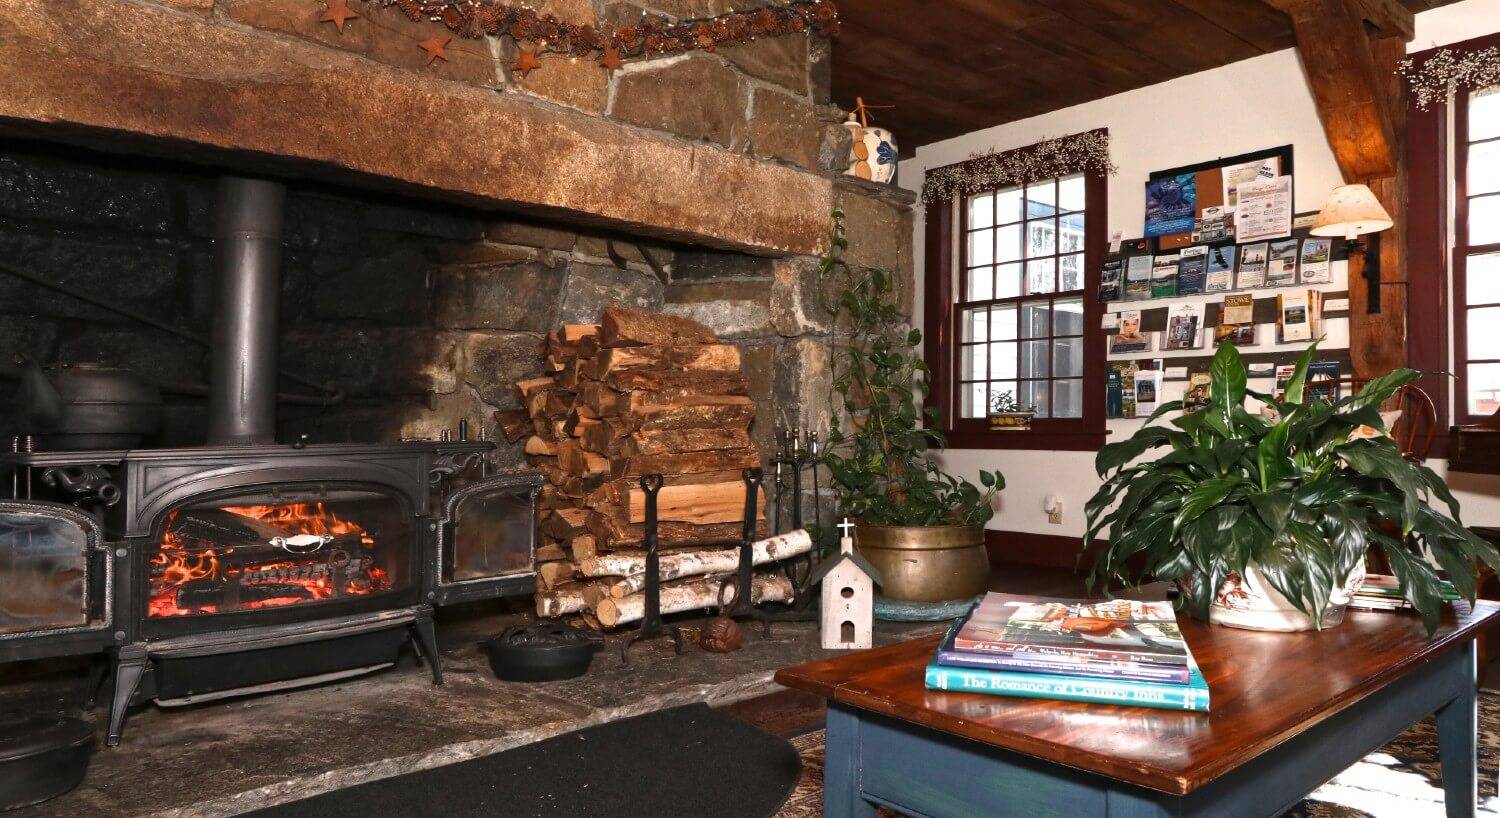 Large stone fireplace with wood burning stove, stack of firewood and coffee table with books and a plant